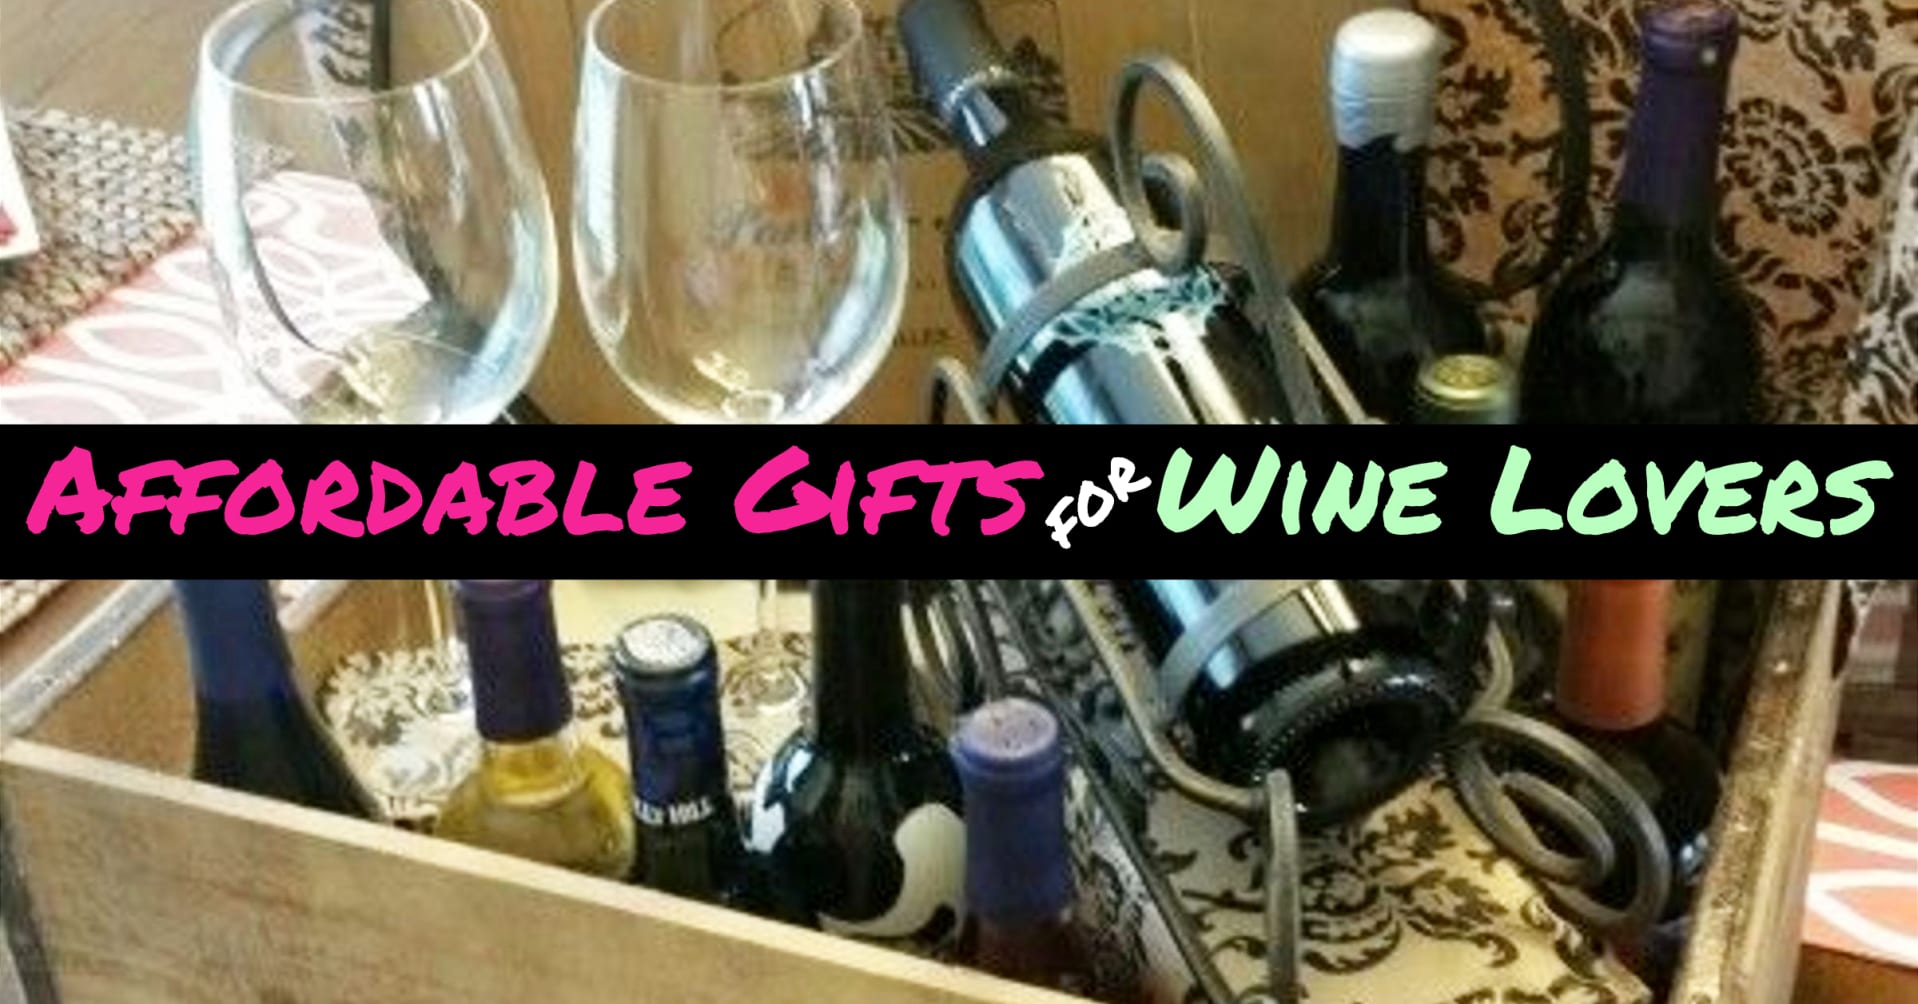 Gifts for wine lovers! inexpensive gifts for wine lovers and for the wine lover who has everything.  You've seen the gifts for wine lovers on buzzfeed, right?  These unique wine gifts are a lot more fun!